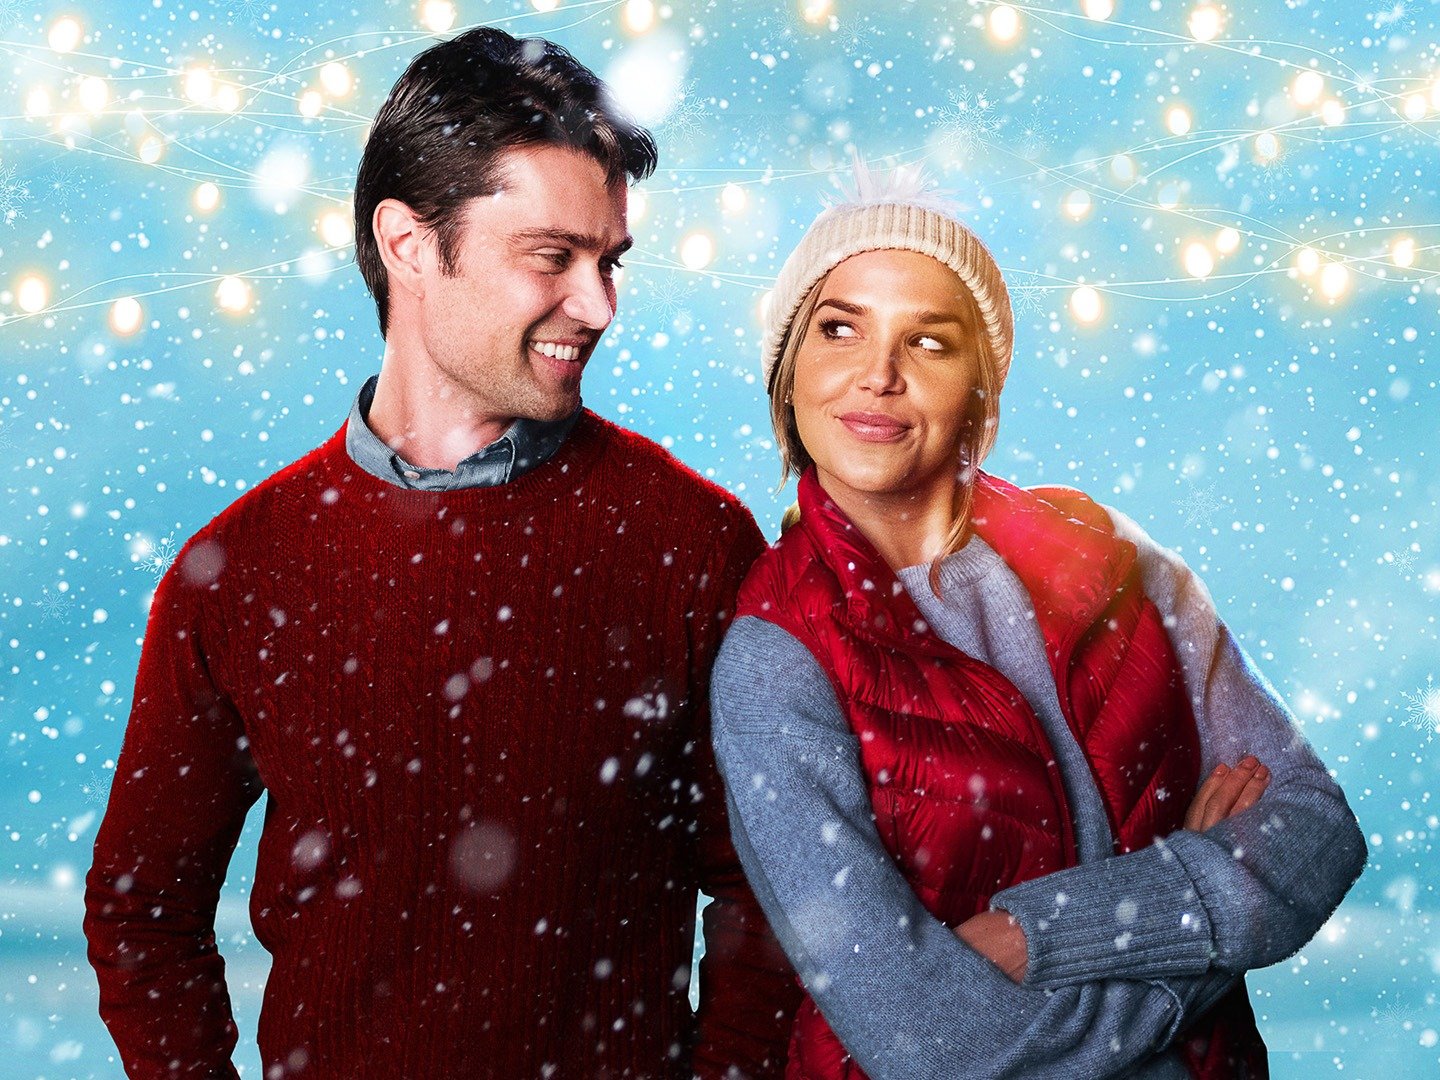 Four Christmases and a Wedding - Rotten Tomatoes